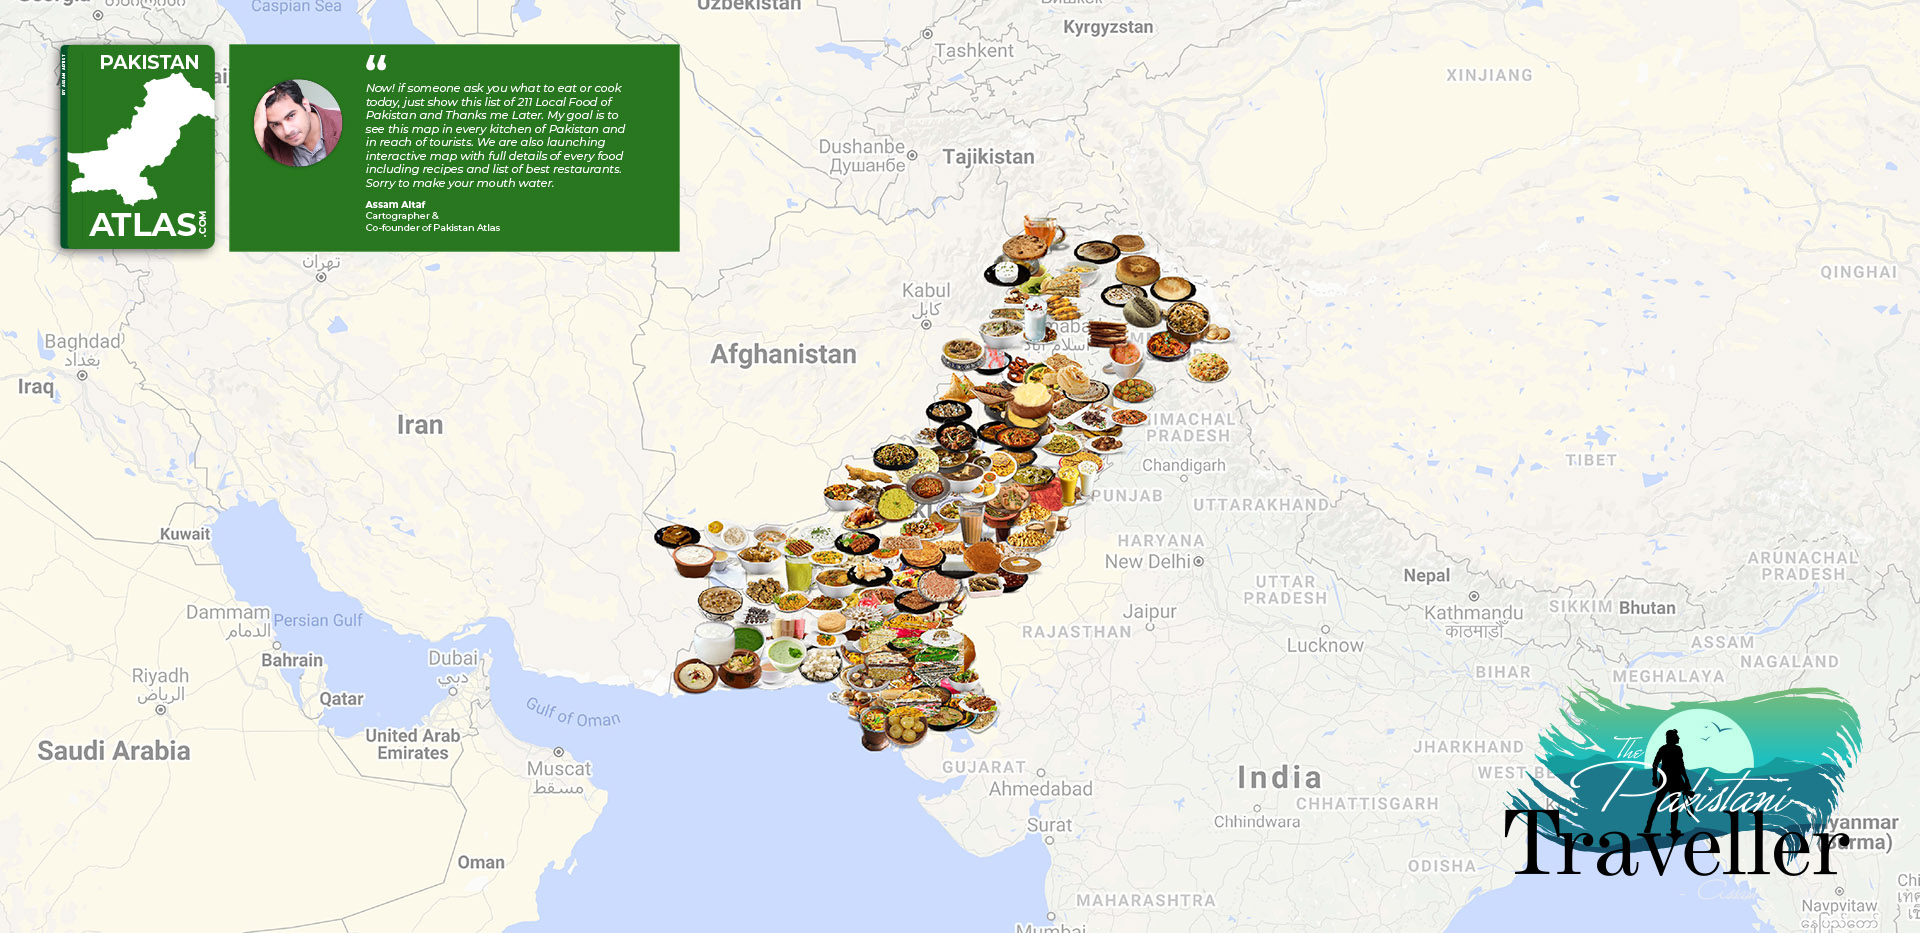 Pakistani artist curates country’s first complete traditional food map